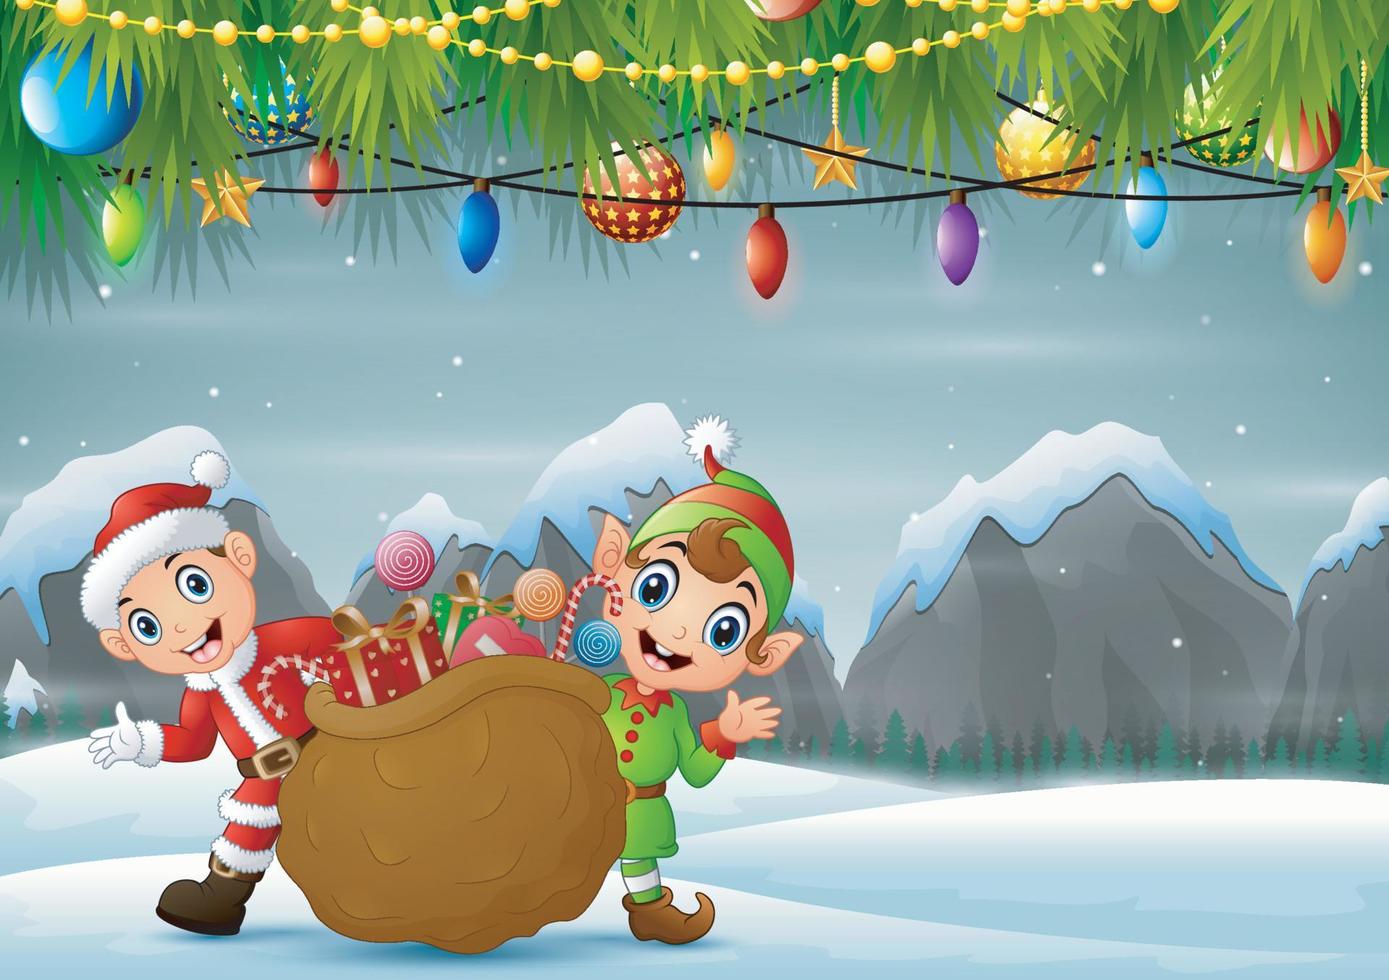 Elf and santa claus carrying christmas presents in winter background vector